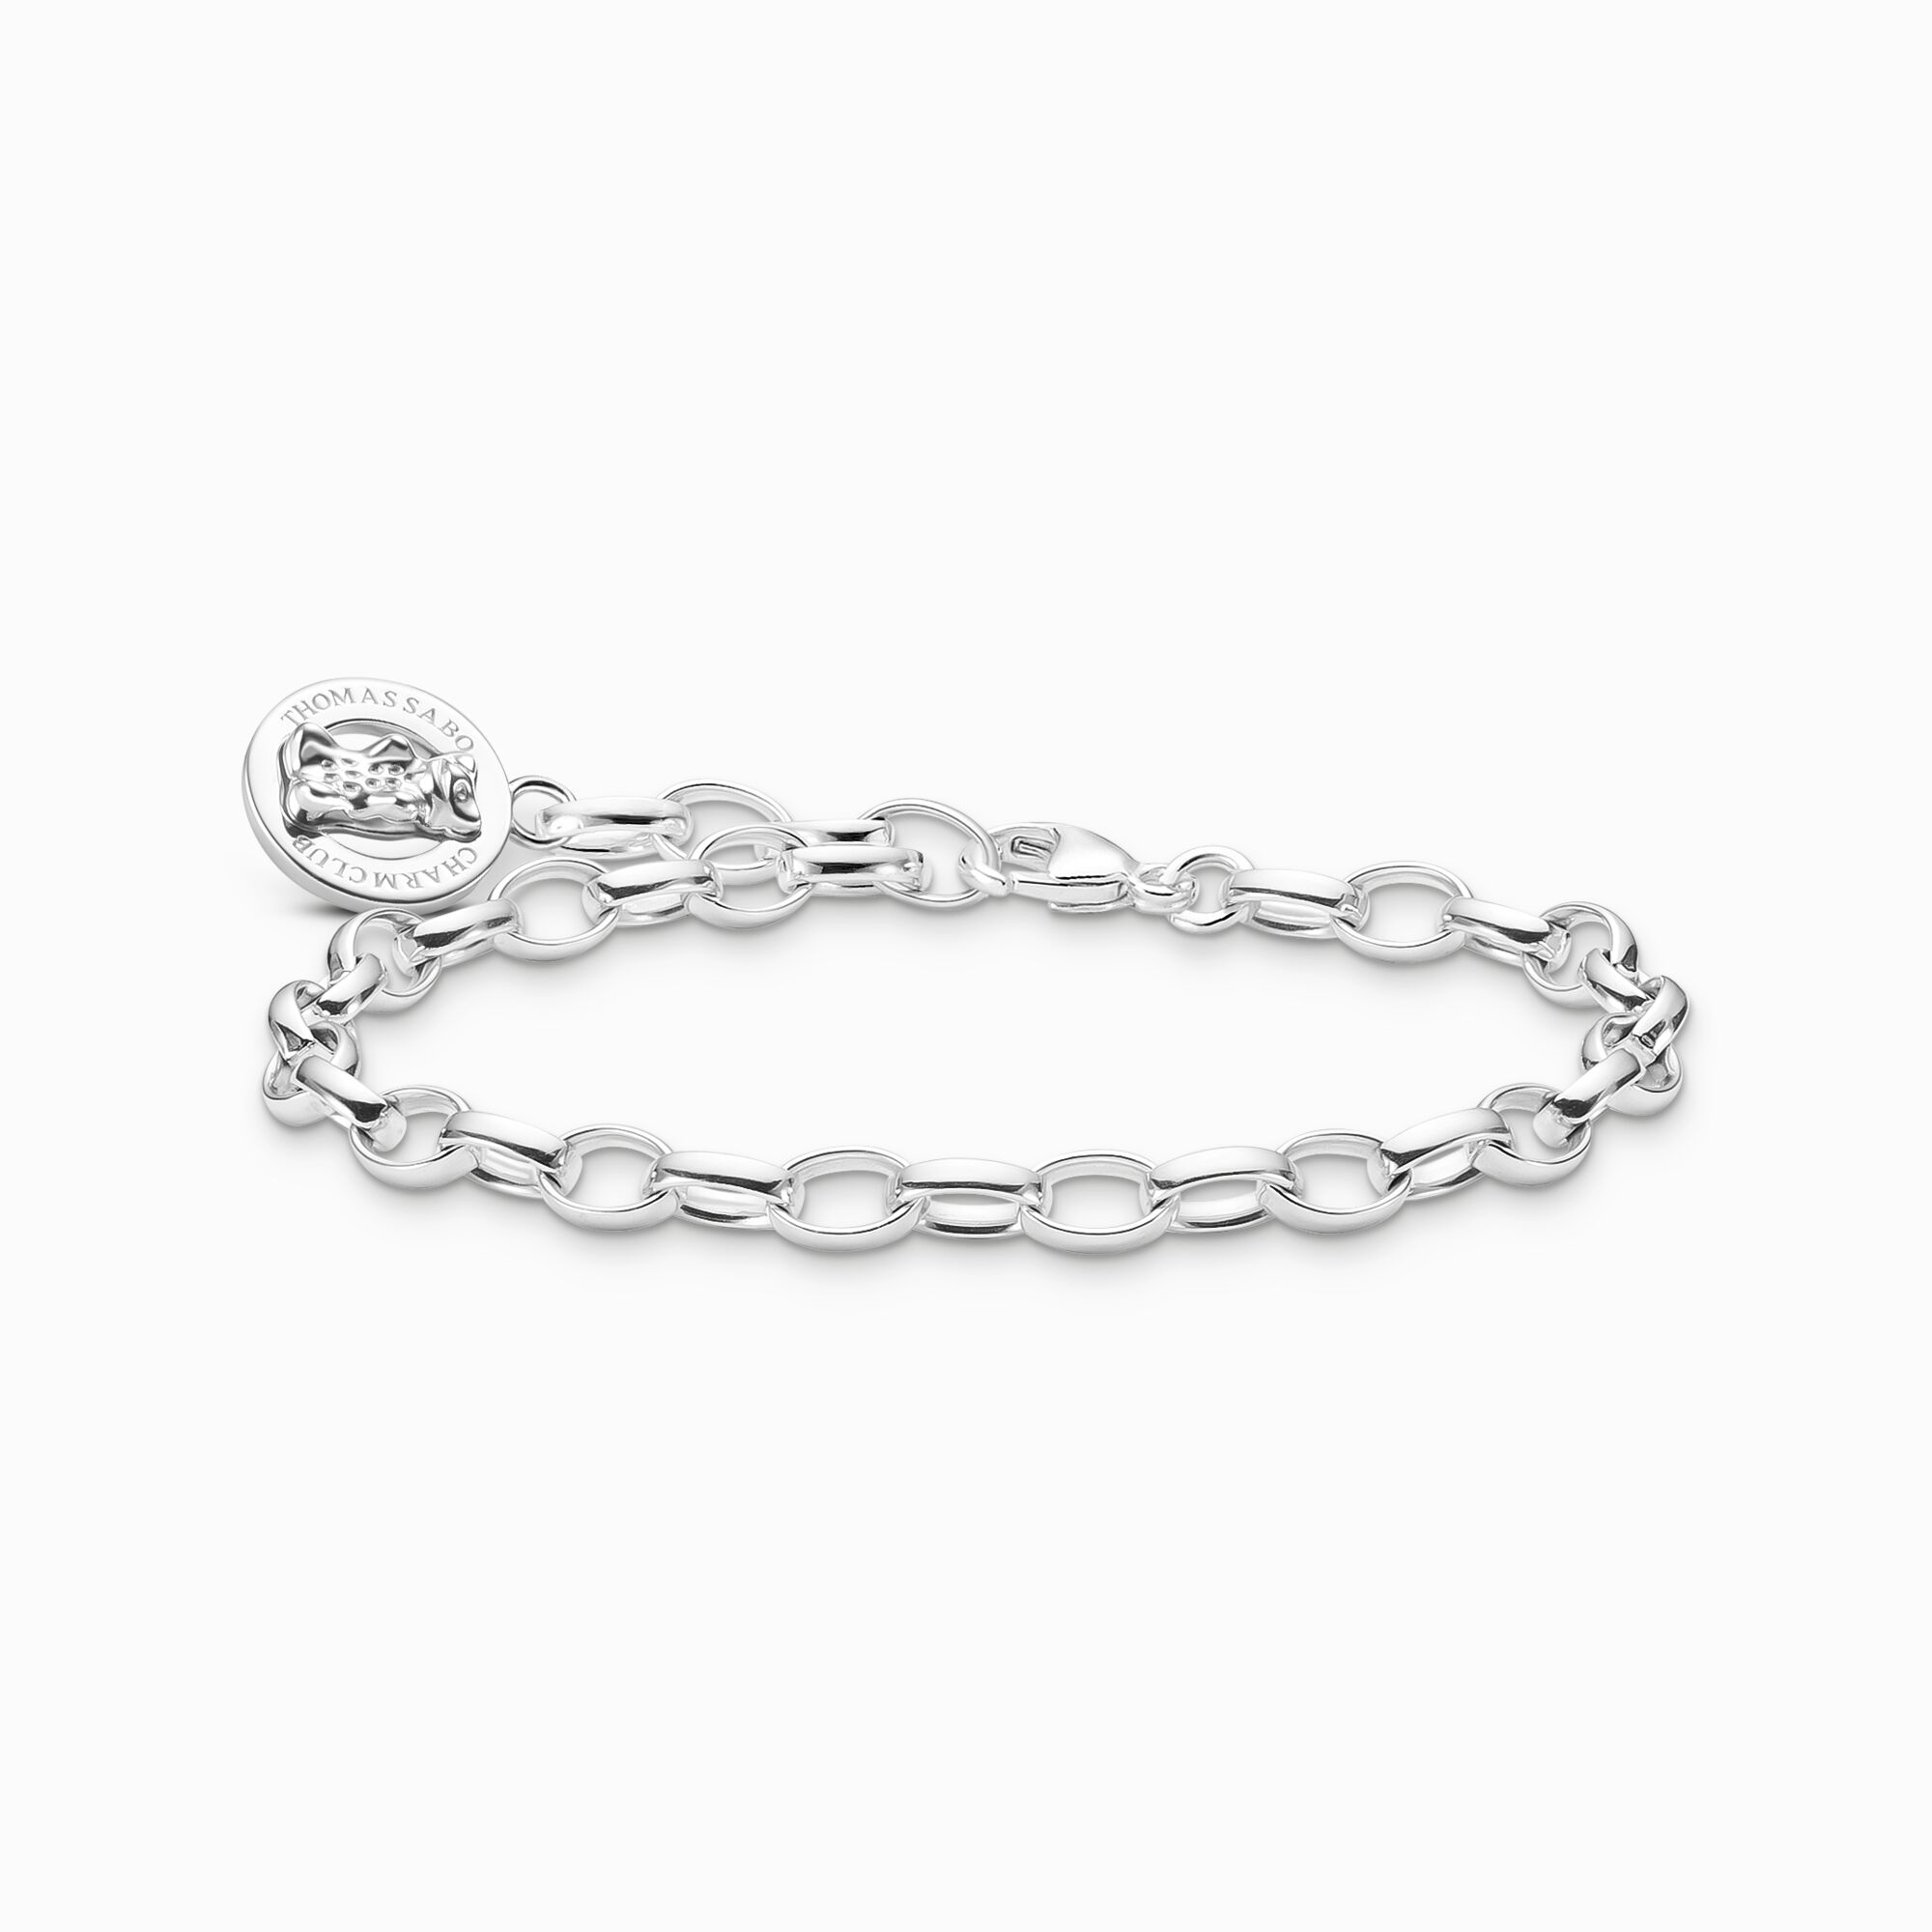 Silver charm bracelet with goldbears logo ring from the Charm Club collection in the THOMAS SABO online store